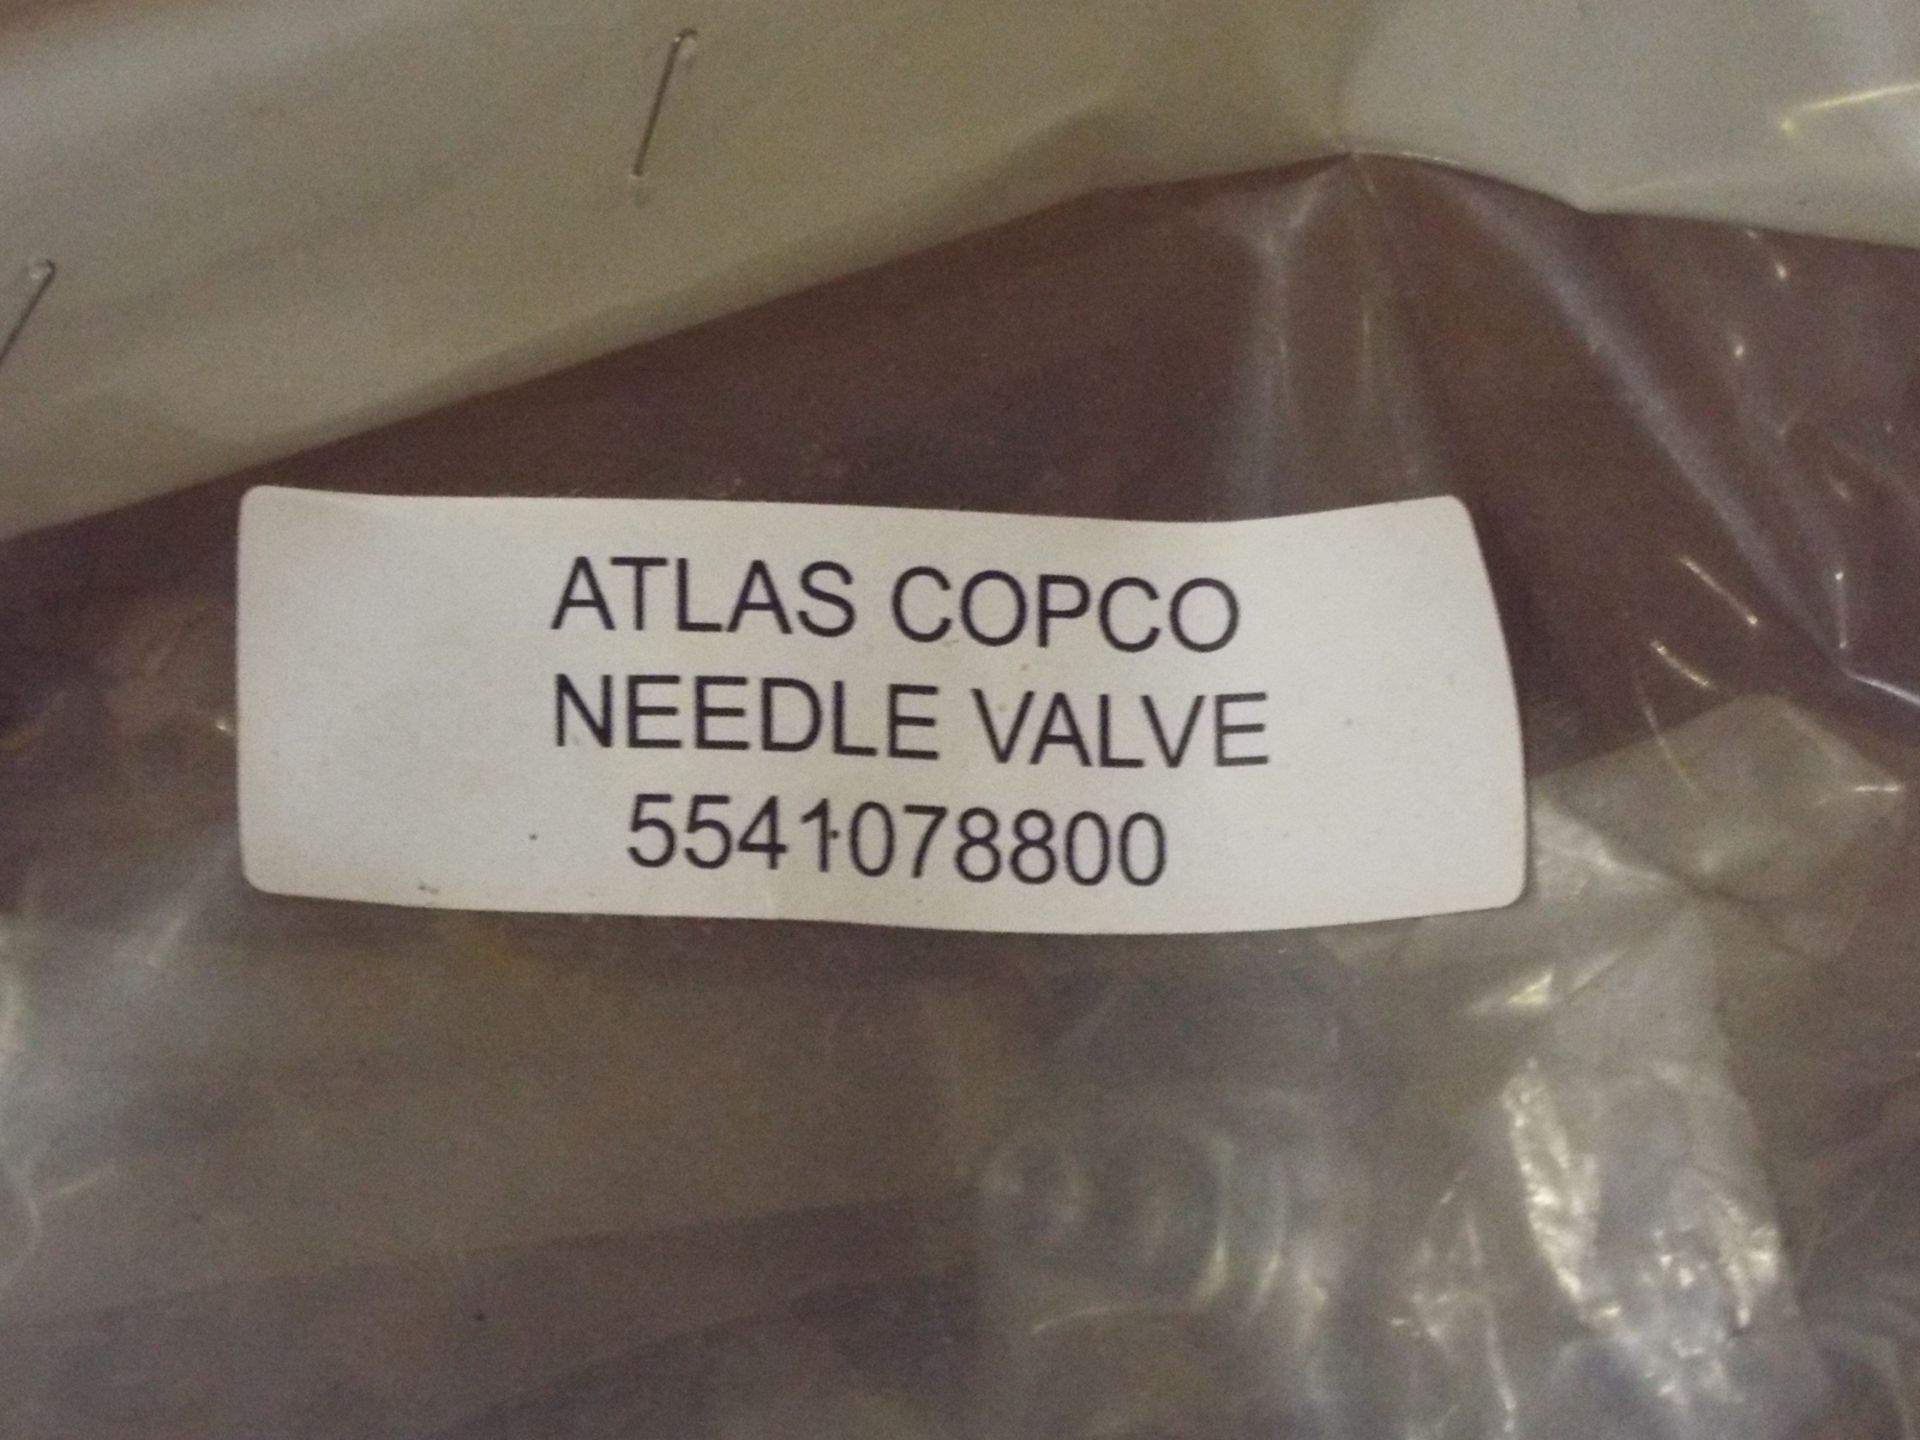 LOT/ ATLAS COPCO PARTS INCLUDING PIPE, FLOW CONTROL, NEEDLE VALVE, SEATBELT, HORN, AND HOSE - Image 4 of 14